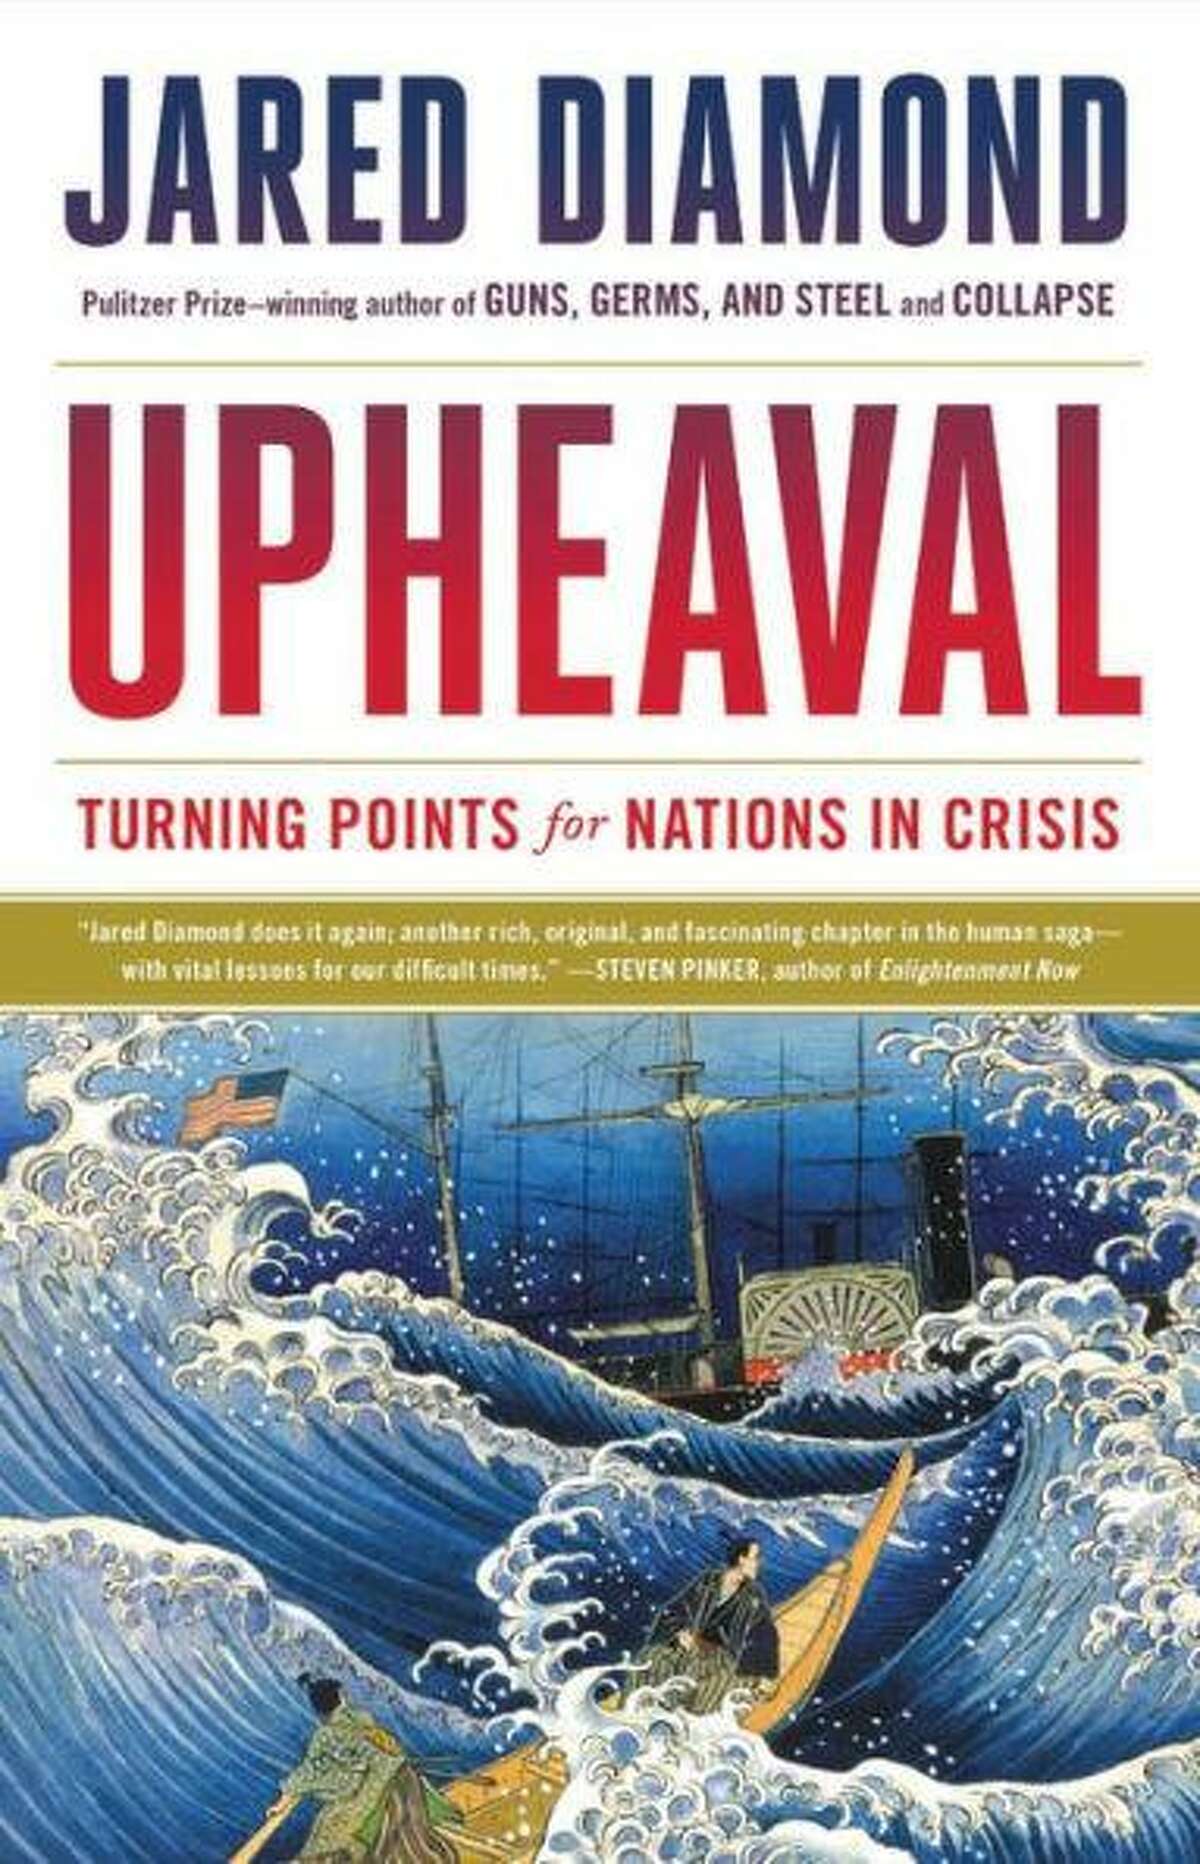 Jared Diamond is the author of Upheaval: Turning Points for Nations in Crisis